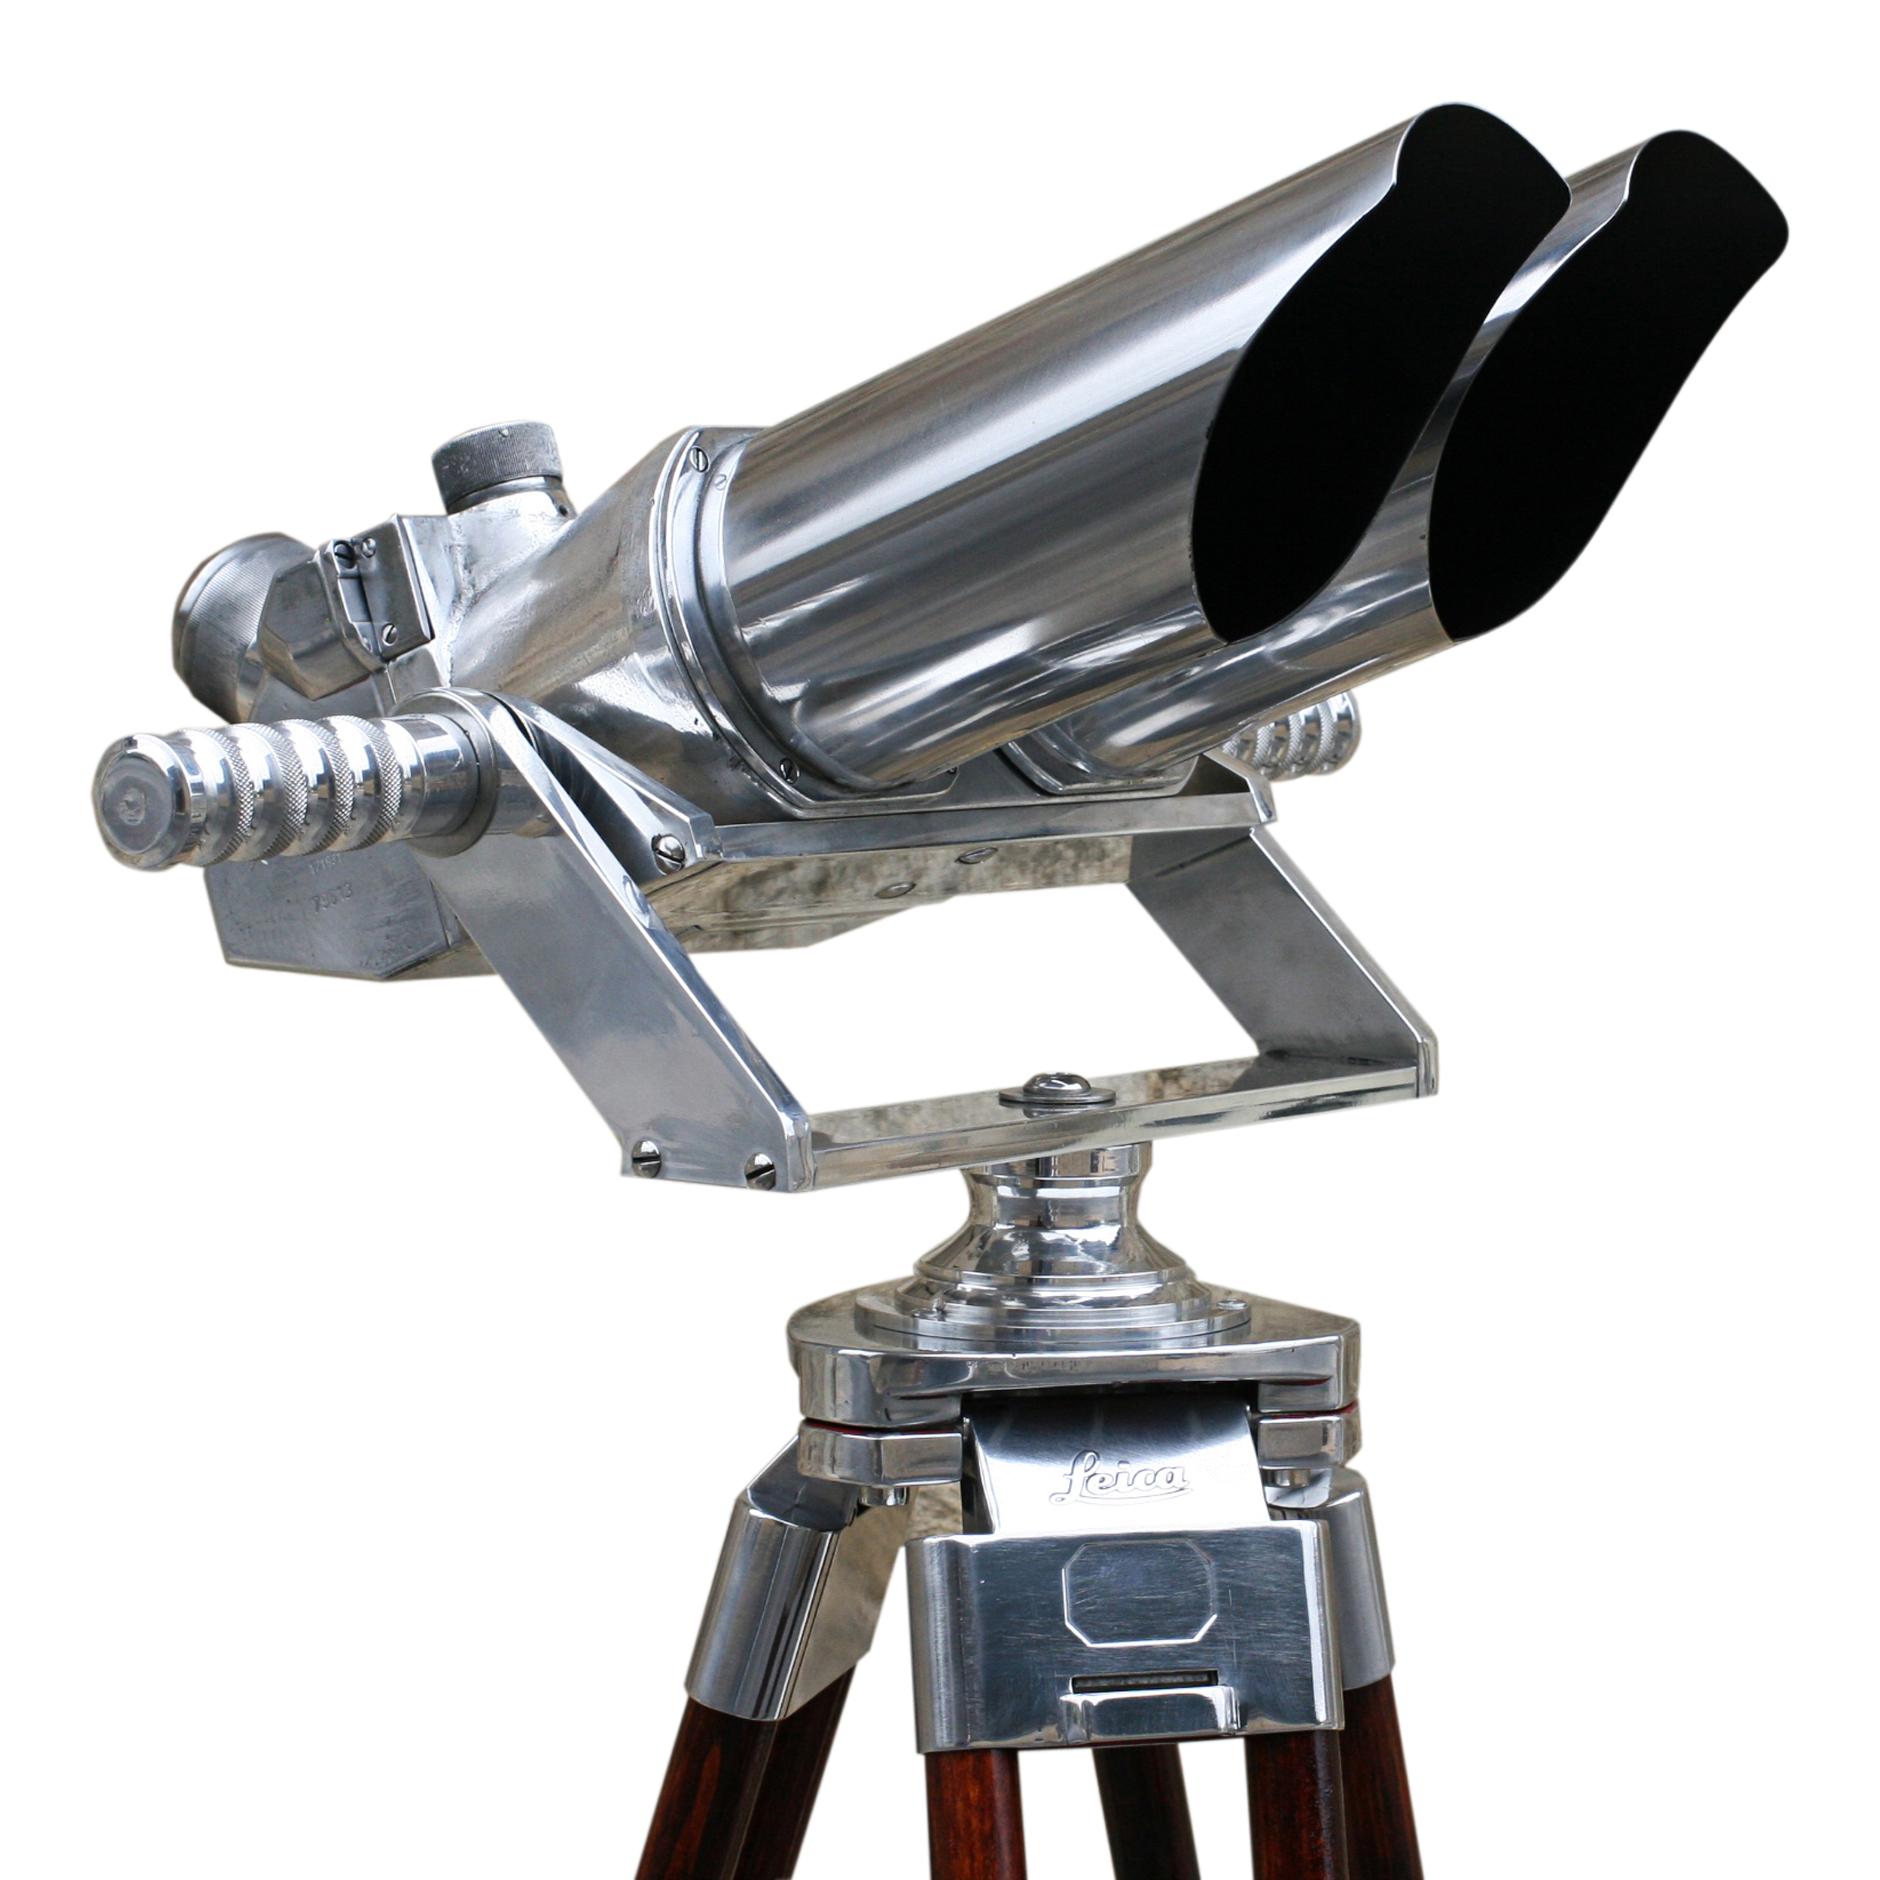 German Observation Binoculars, 10 X 80
A pair of German ex-military observation binoculars mounted on a modern aluminium cradle with vintage adjustable wooden tripod by Leica. The binoculars with 45º incline eyepieces are marked D.F. 10 x 80, X cxn